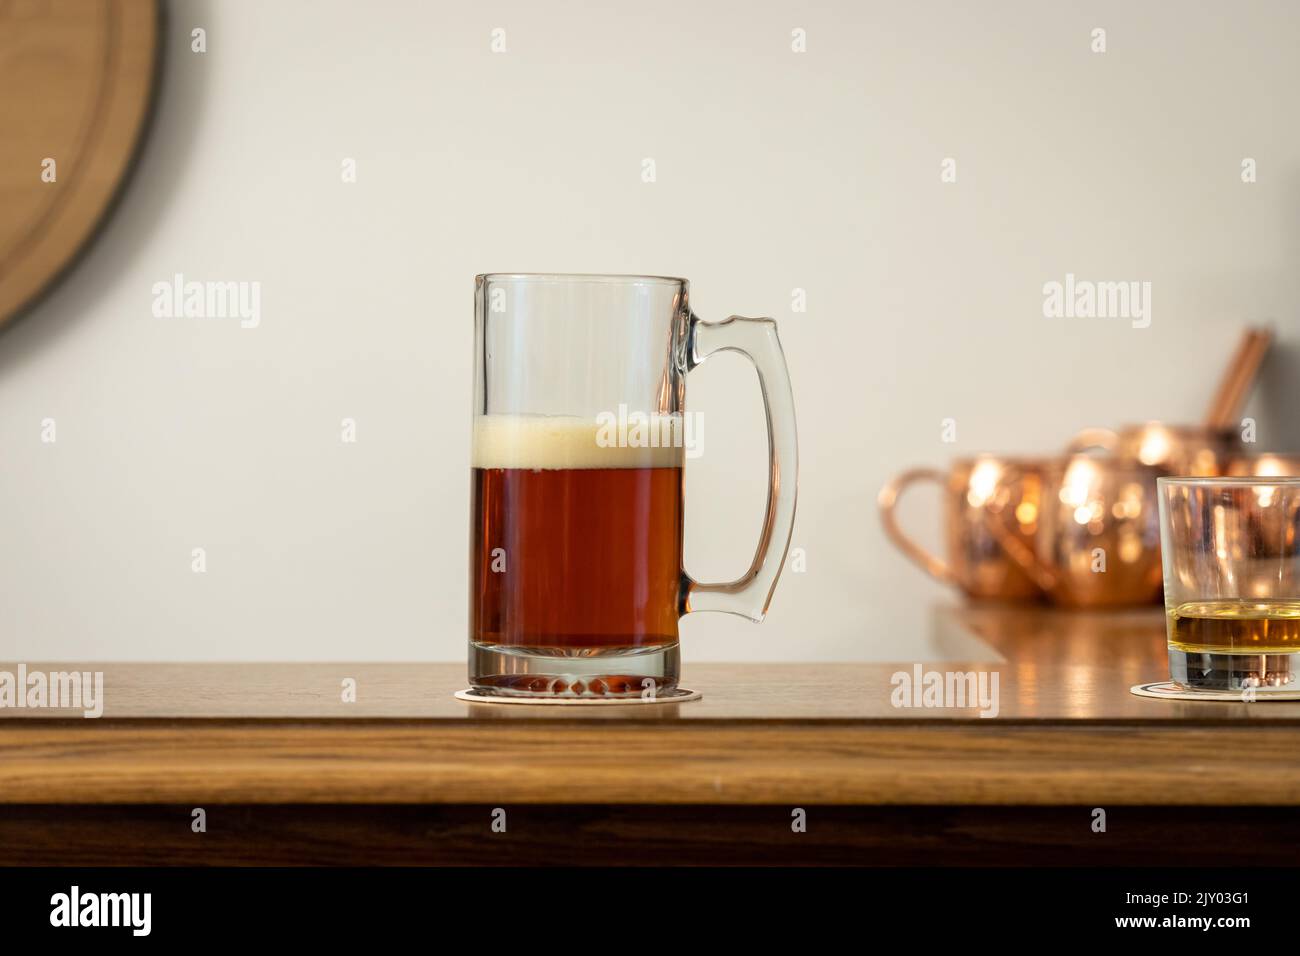 Stein of Beer with Froth Foam on Wooden Bar Stock Photo